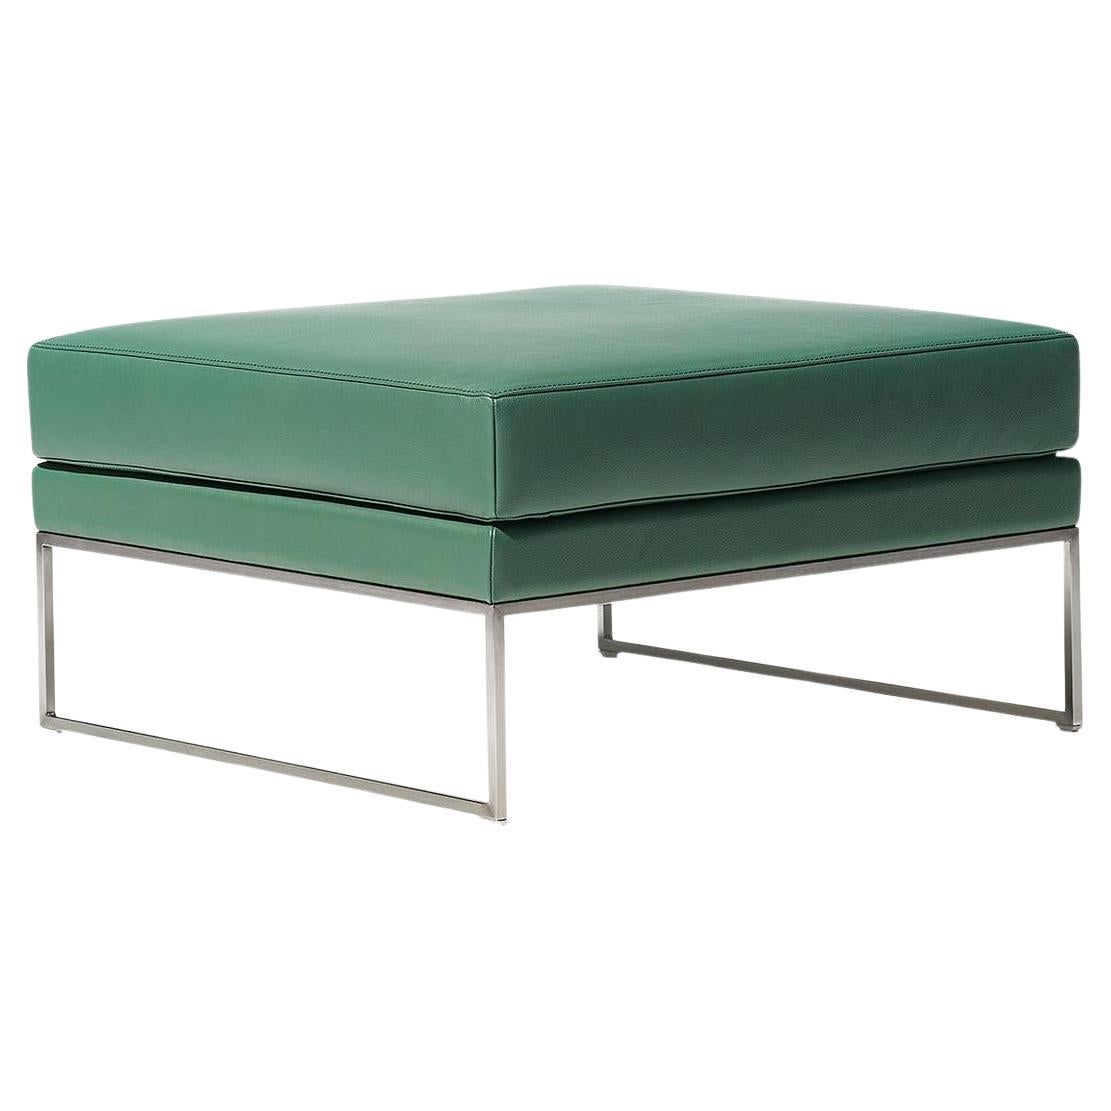 De Sede DS-160 Stool in Turquoise Leather Upholstery by De Sede Design Team For Sale